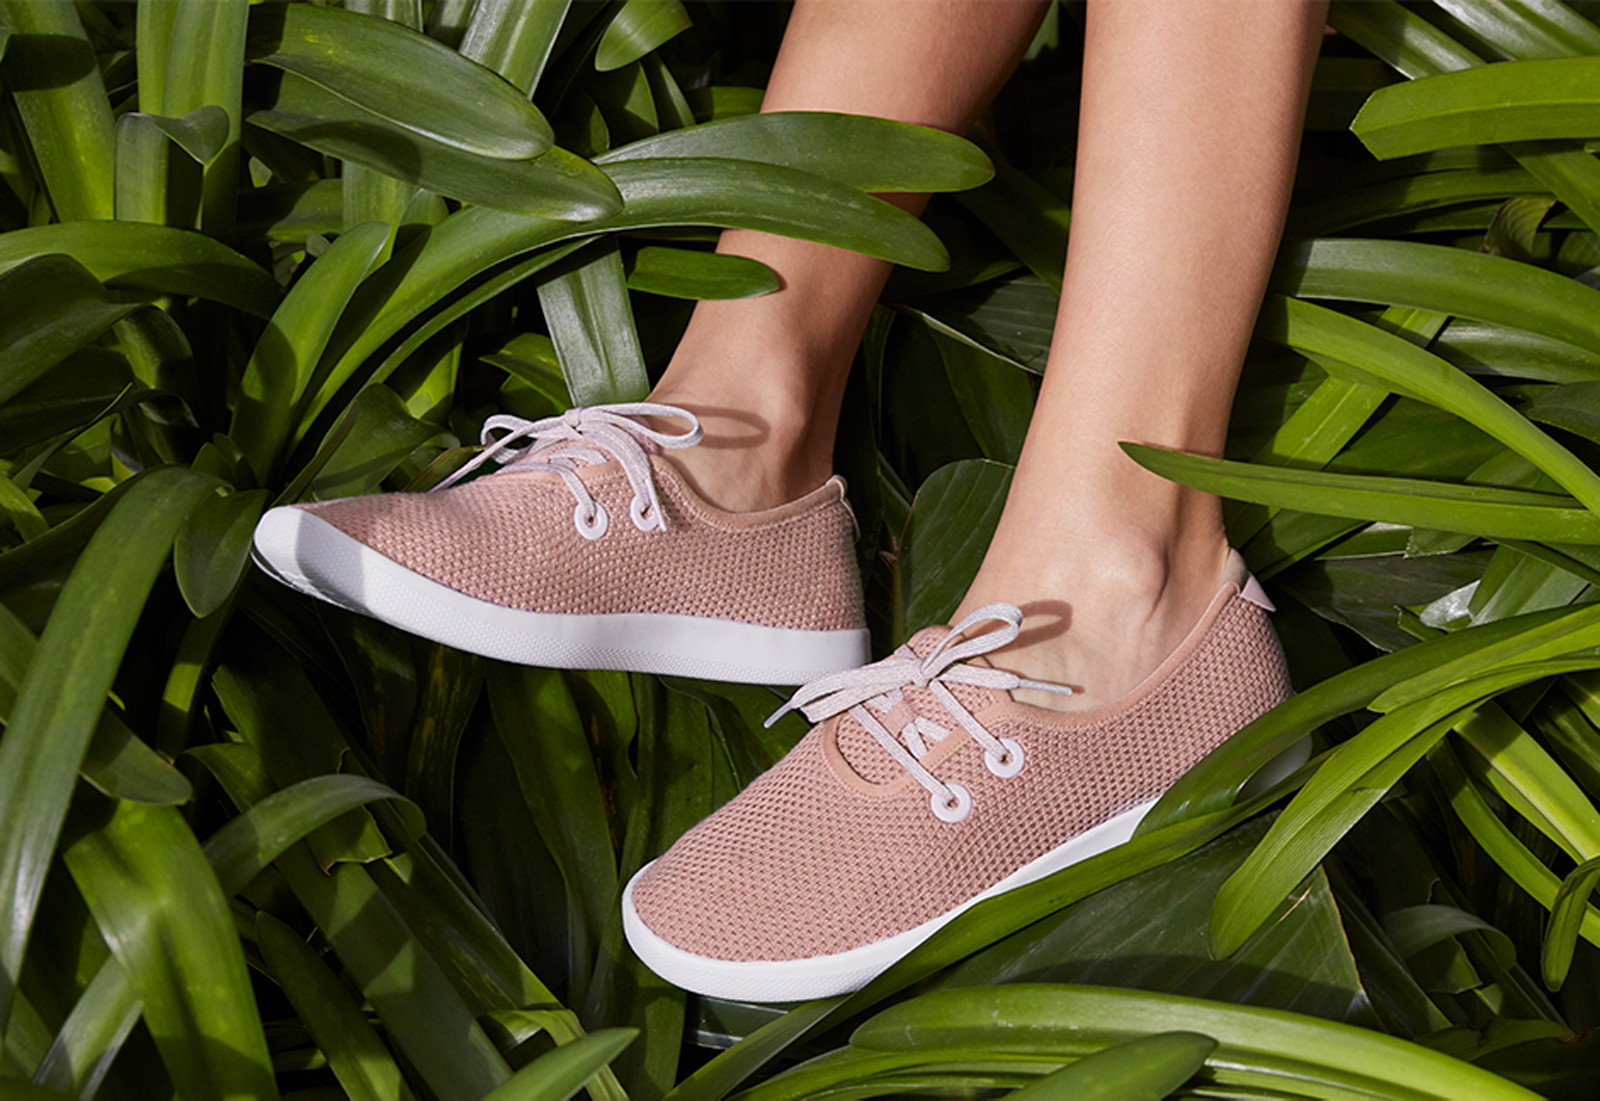 Allbirds eco-friendly sneakers be the comfiest shoes you'll ever own | CNN Underscored